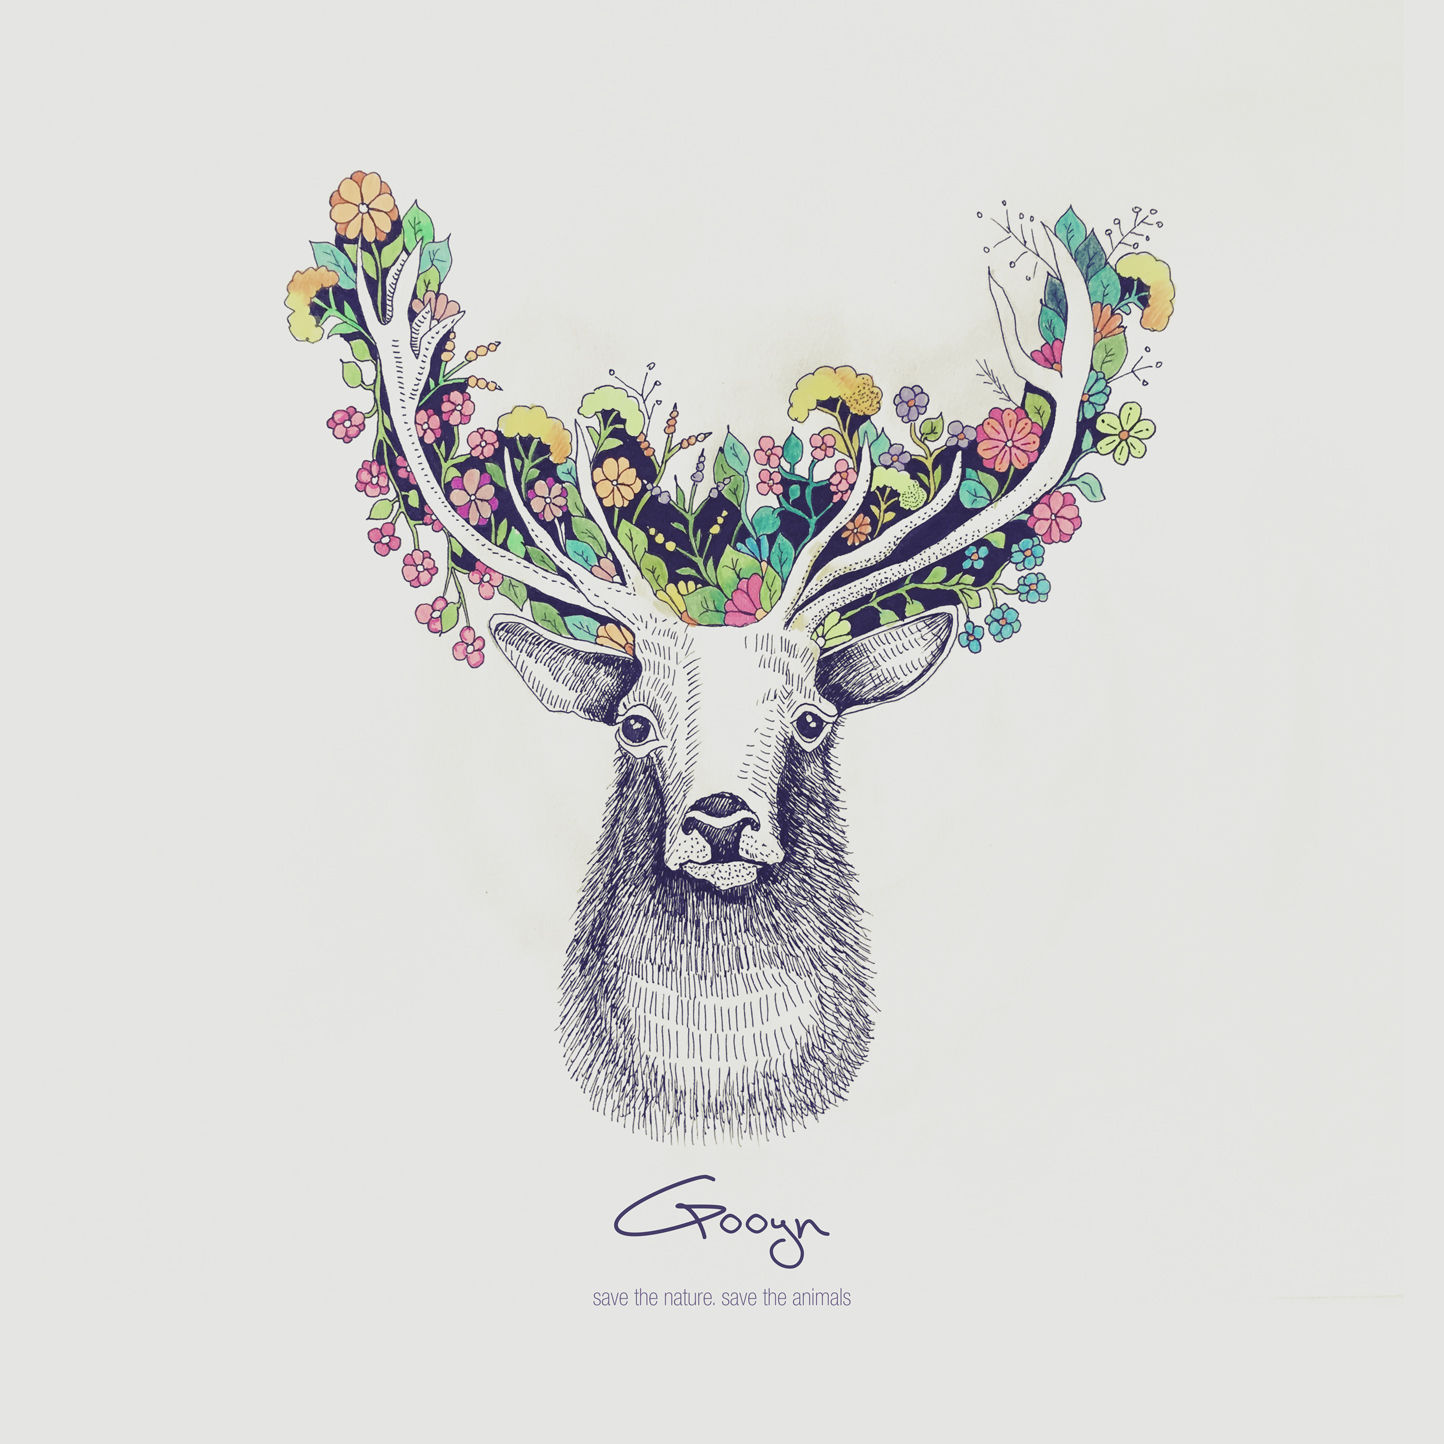 Save the nature, save the animals on Behance